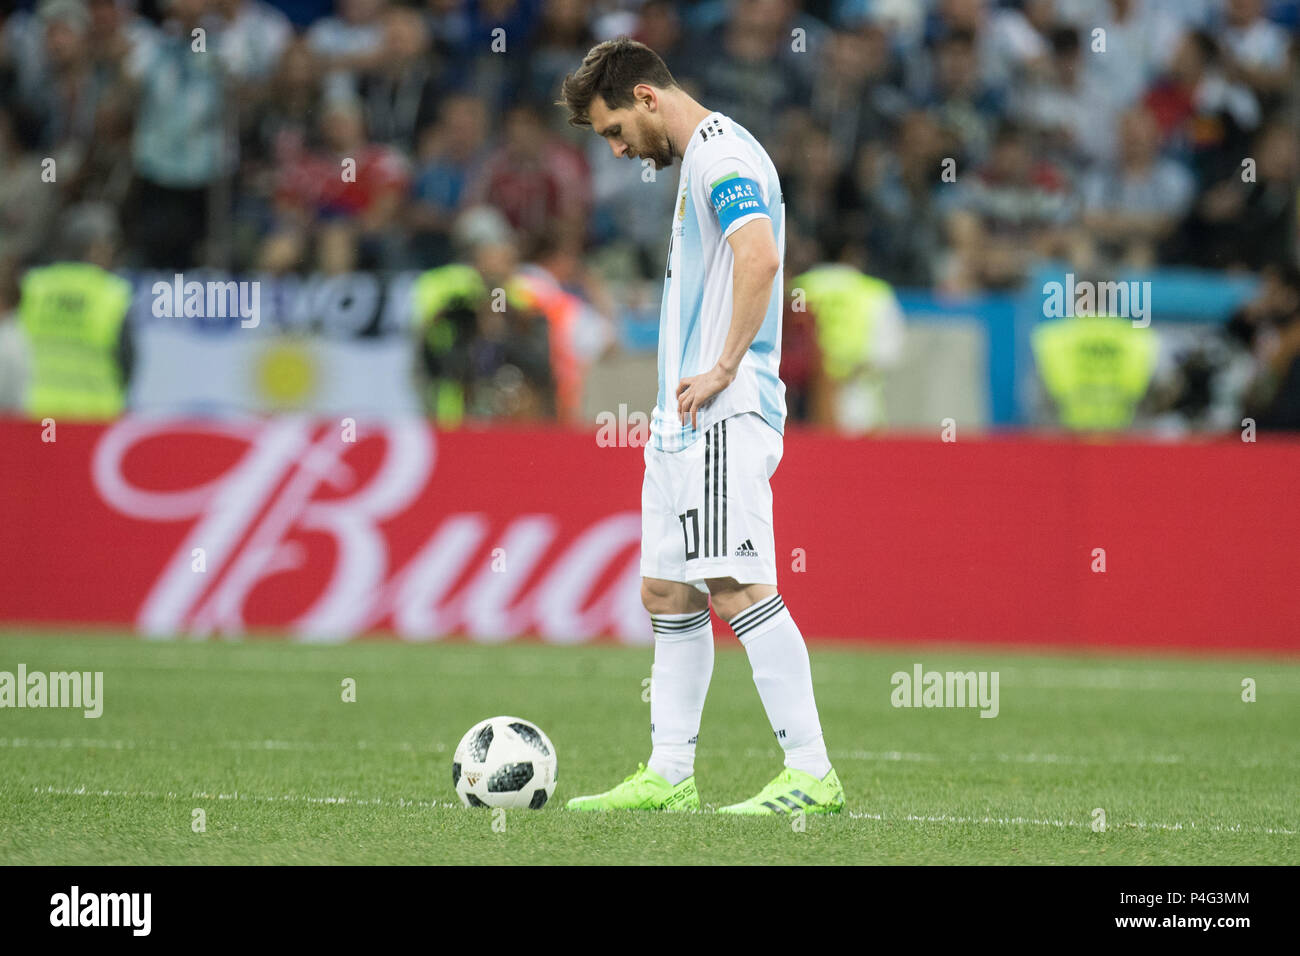 Nizhny Novgorod, Russia. 21 June 2018.  Lionel MESSI (ARG) looks to the ground after the goal to make it 1-0 for Croatia, looks down below, full figure, frustrated, frustrated, late flushed, disappointed, showered, decapitation, disappointment, sad, Argentina (ARG) - Croatia (CRO) 0: 3, preliminary round, group D, match 23, on 21.06.2018 in Moscow; Football World Cup 2018 in Russia from 14.06. - 15.07.2018. | usage worldwide Credit: dpa/Alamy Live News Credit: dpa picture alliance/Alamy Live News Stock Photo